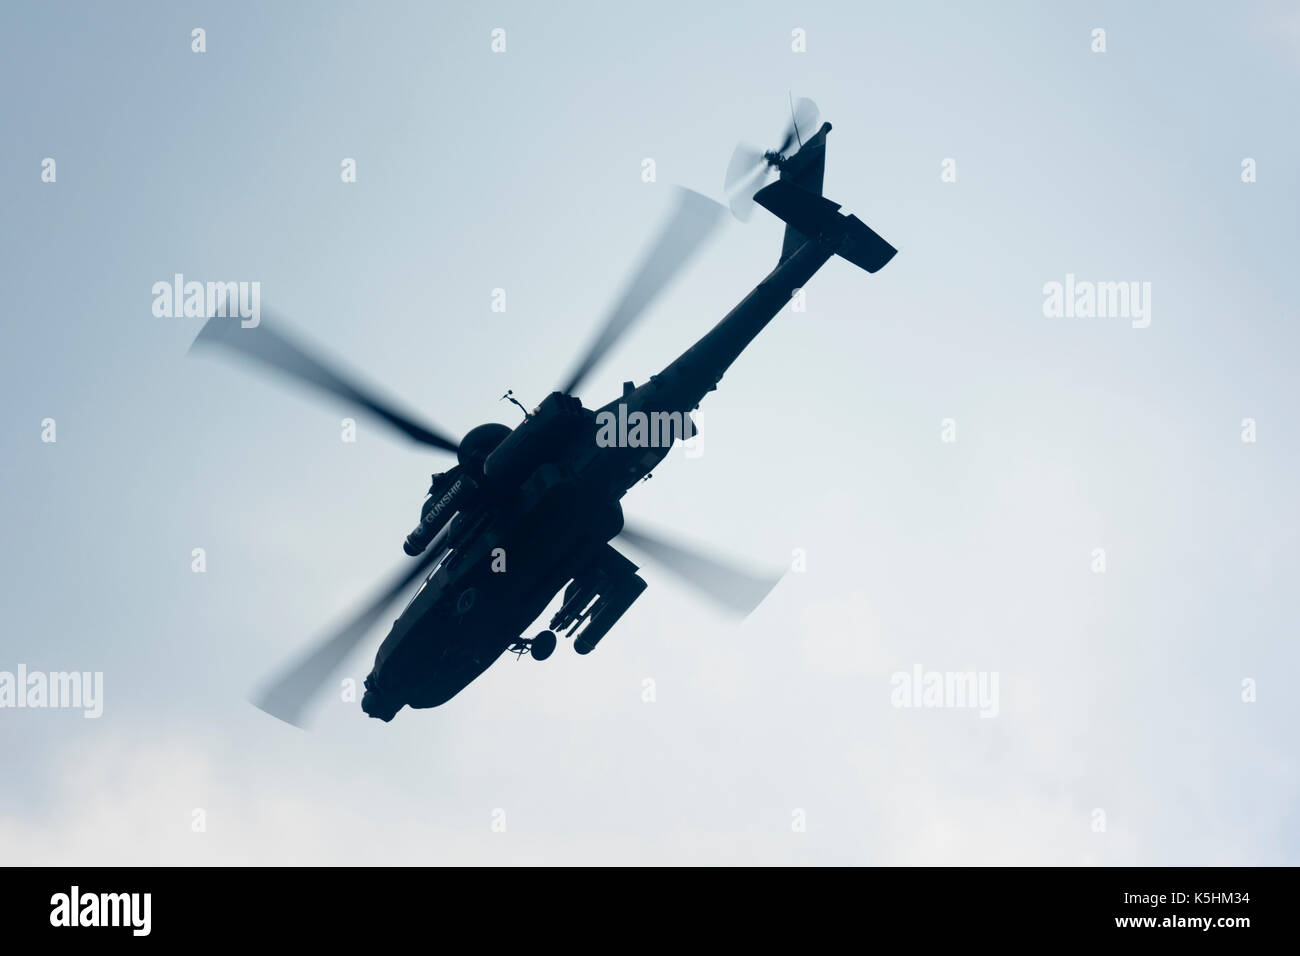 Boeing AH-64 Apache helicopter giving a display. Stock Photo